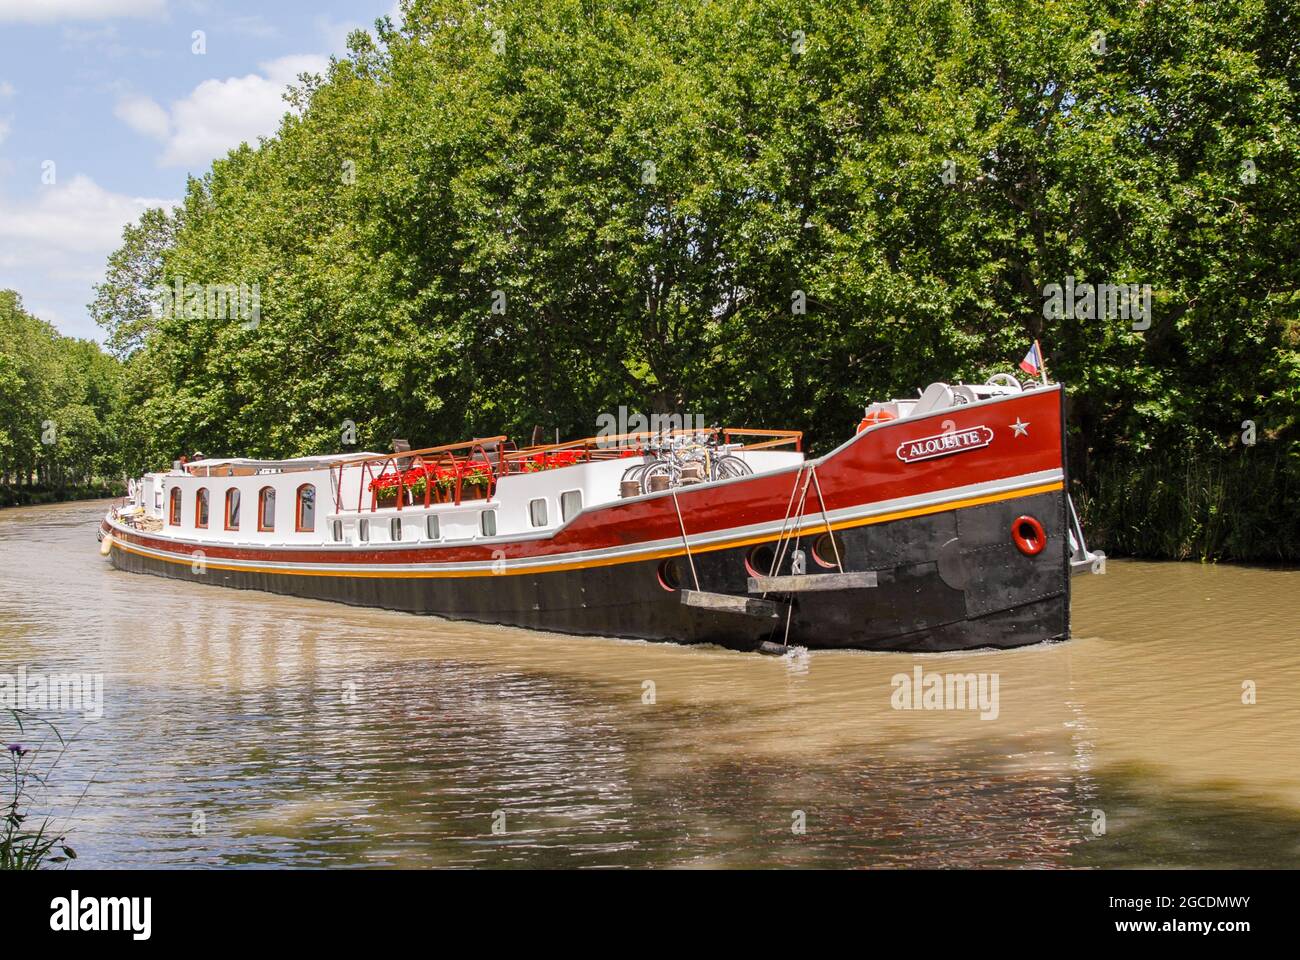 A former barge used as a houseboat navigates on the Canal du Midi Stock Photo